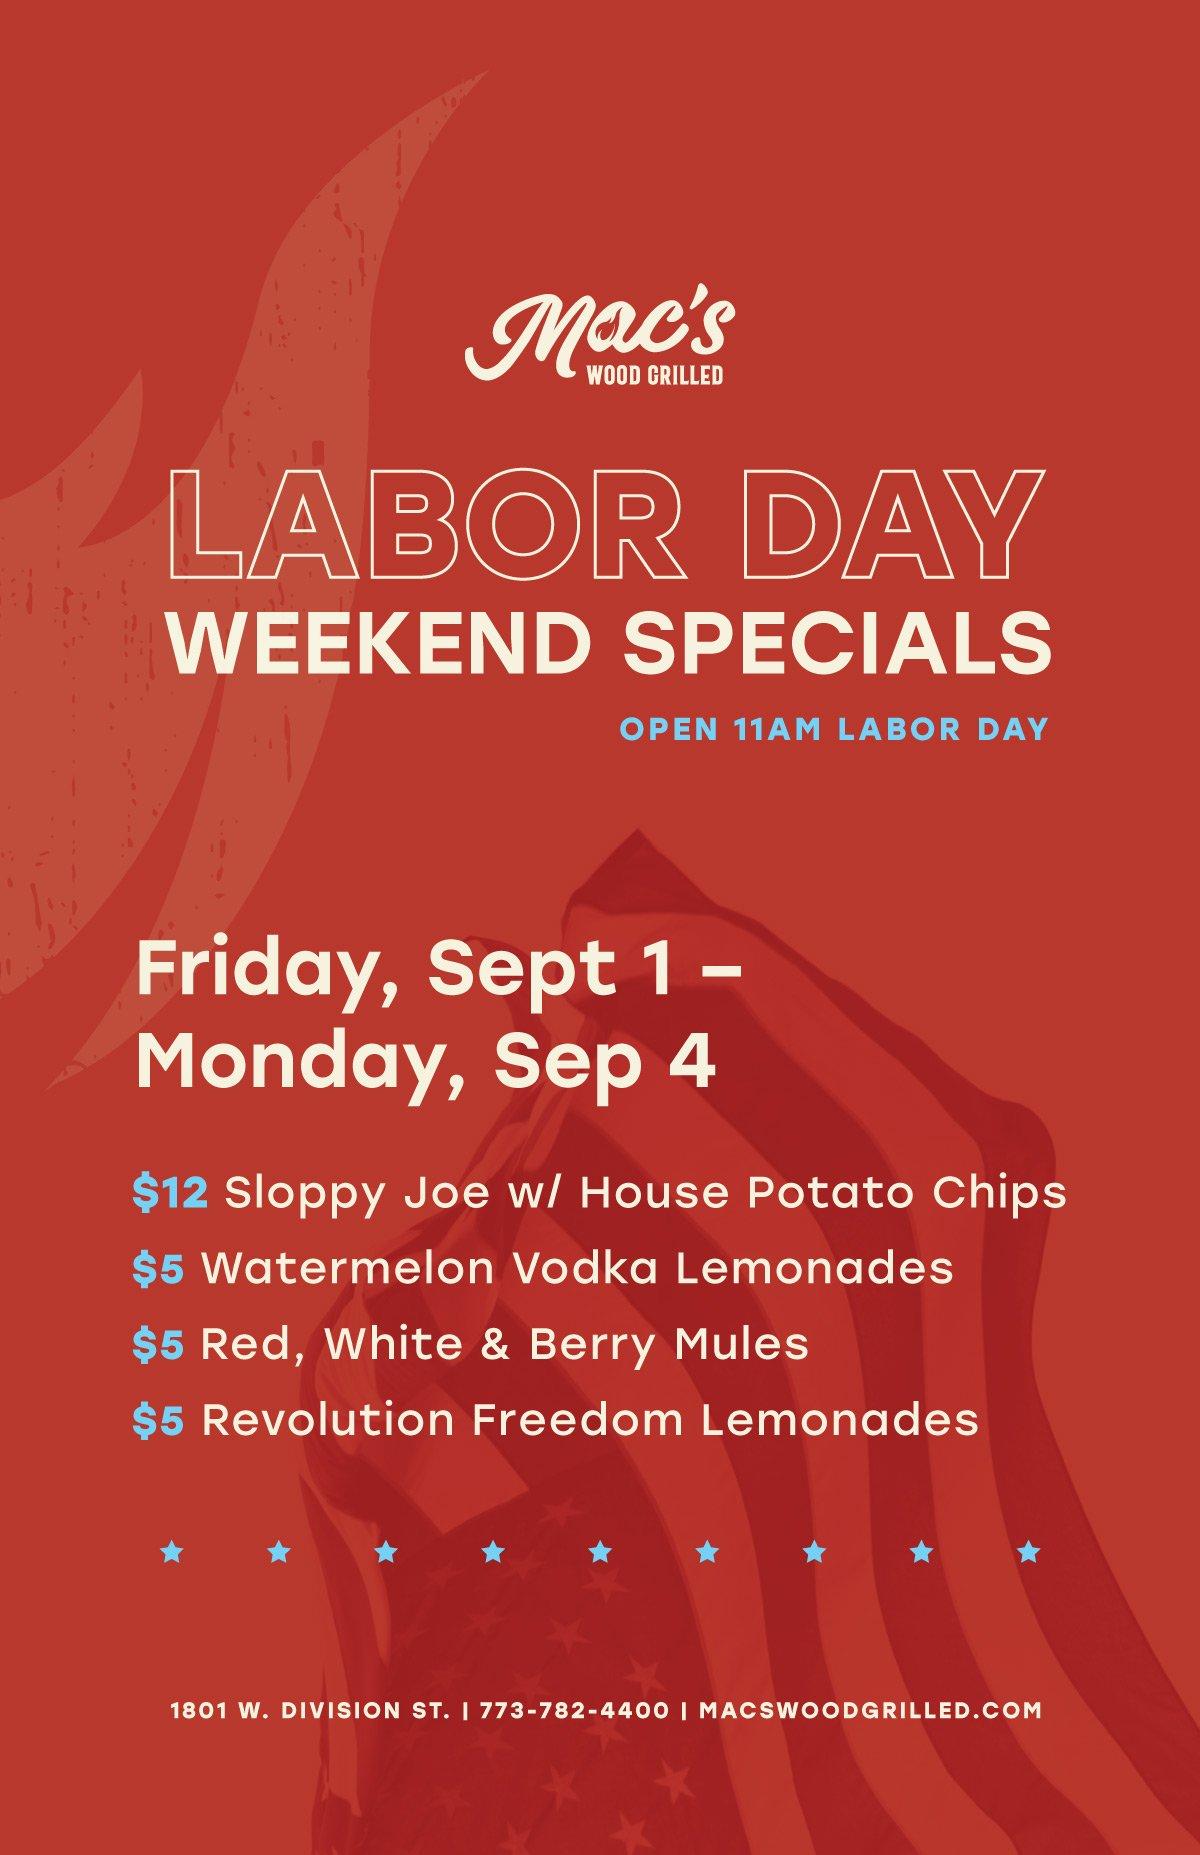 Labor Day Weekend Specials at Mac’s Wood Grilled